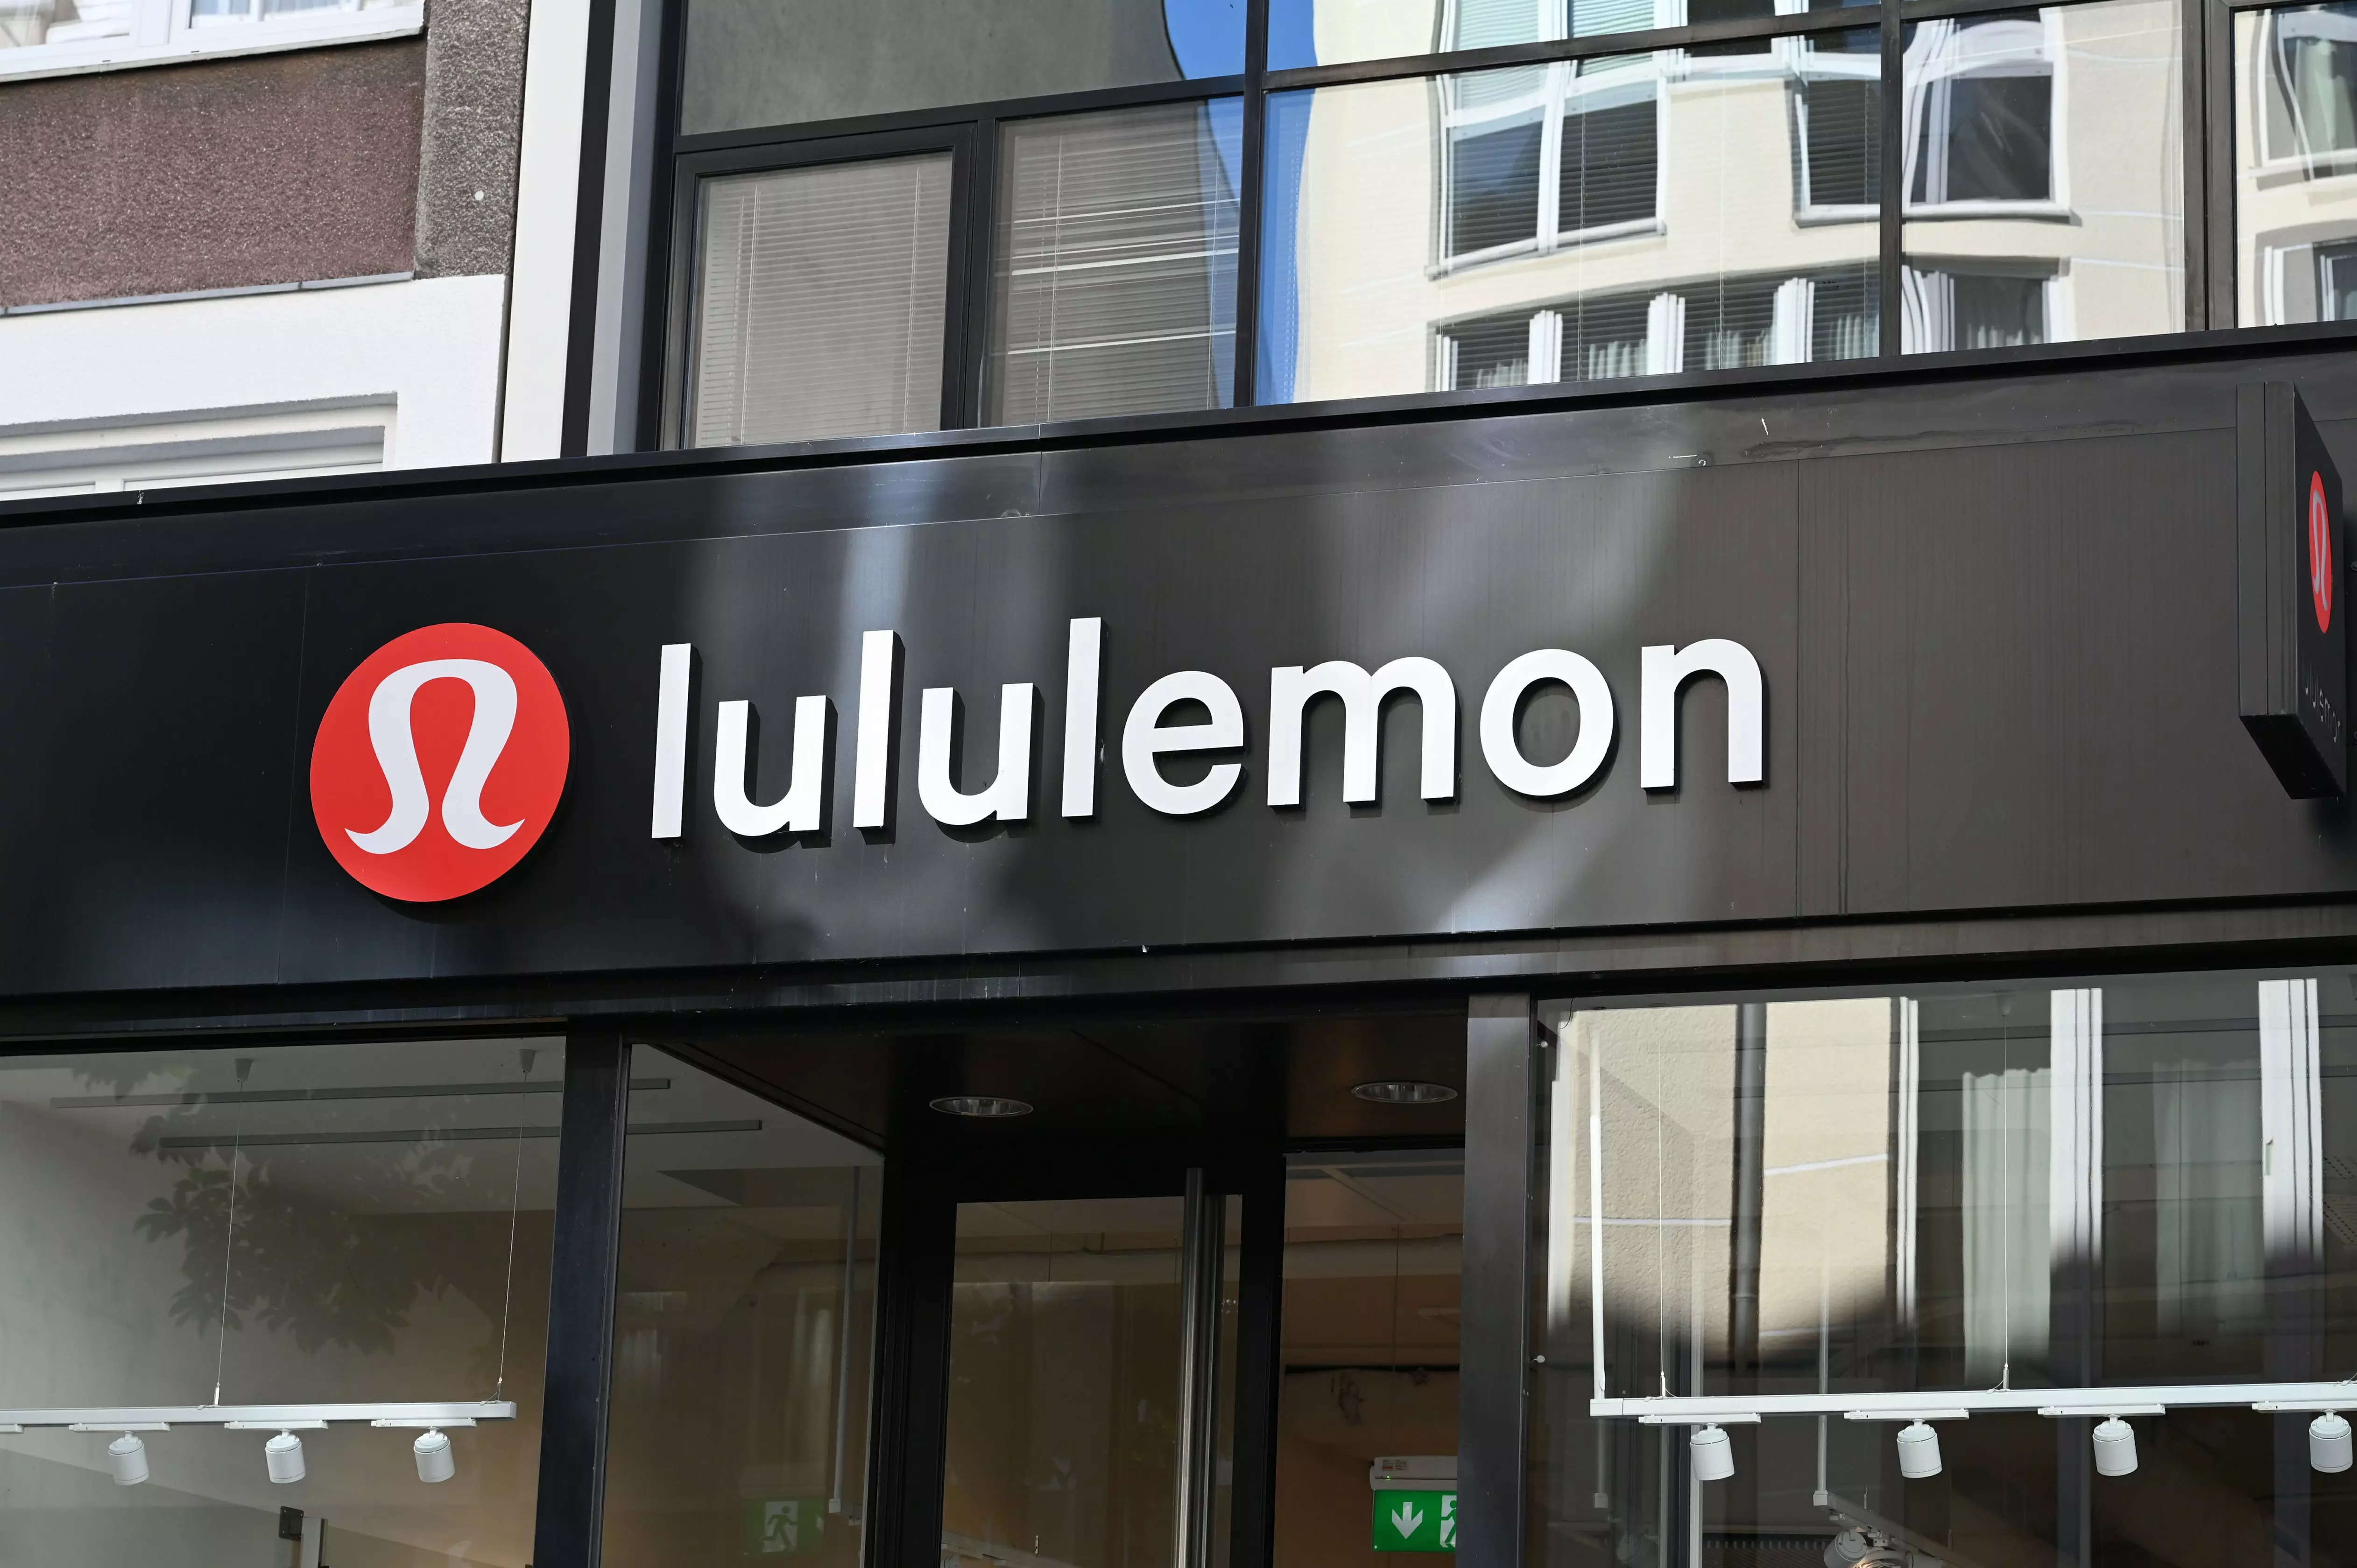 https://www.businessinsider.in/photo/106617366/lululemon-hits-back-at-founders-anti-dei-comments-they-do-not-reflect-our-company-views.jpg?imgsize=406258